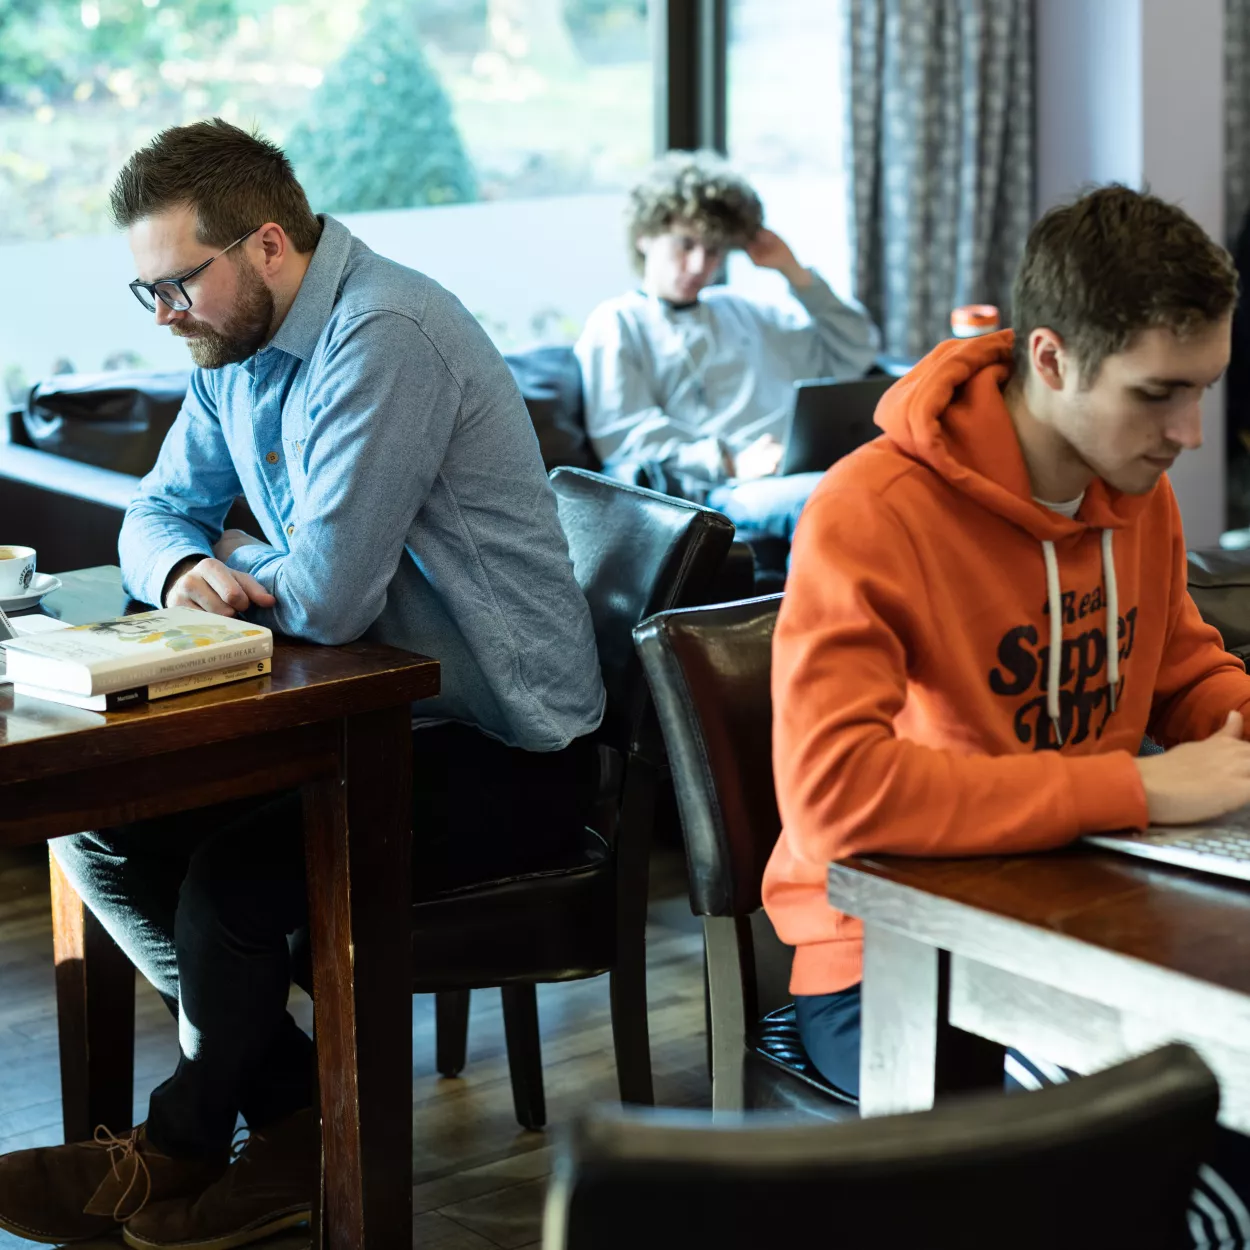 Staff and students are studying at their laptops, seated at different tables in the college cafe